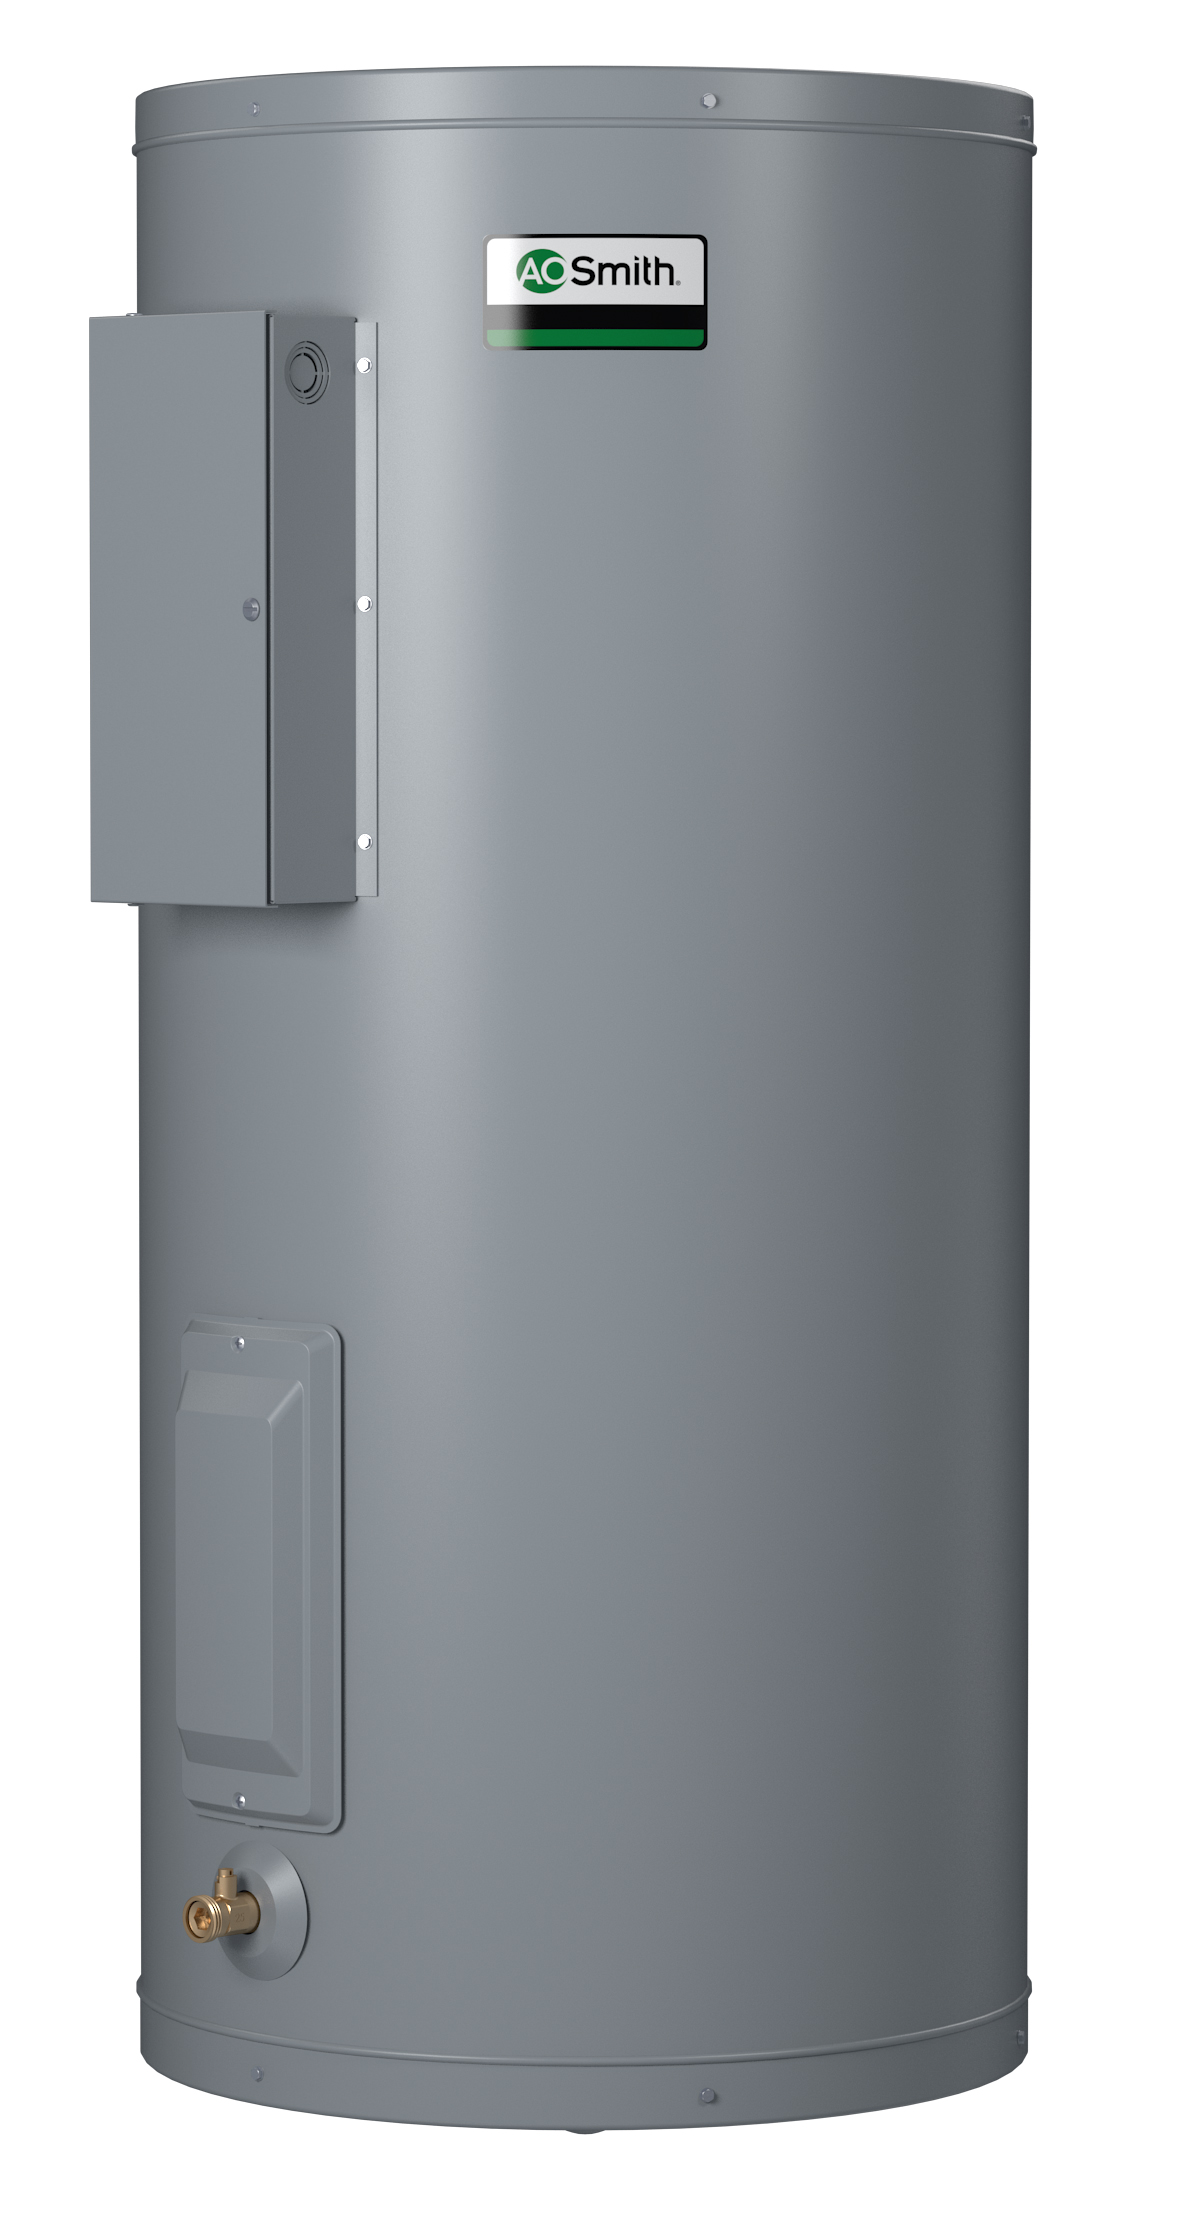 AO SMITH DEL-30D:36 GALLONS, 2.0KW, 240 VOLT, 1/3 PHASE, (2-2000 WATT ELEMENTS, NON-SIMULTANEOUS WIRING), DURA-POWER, LIGHT DUTY COMMERCIAL ELECTRIC WATER HEATER